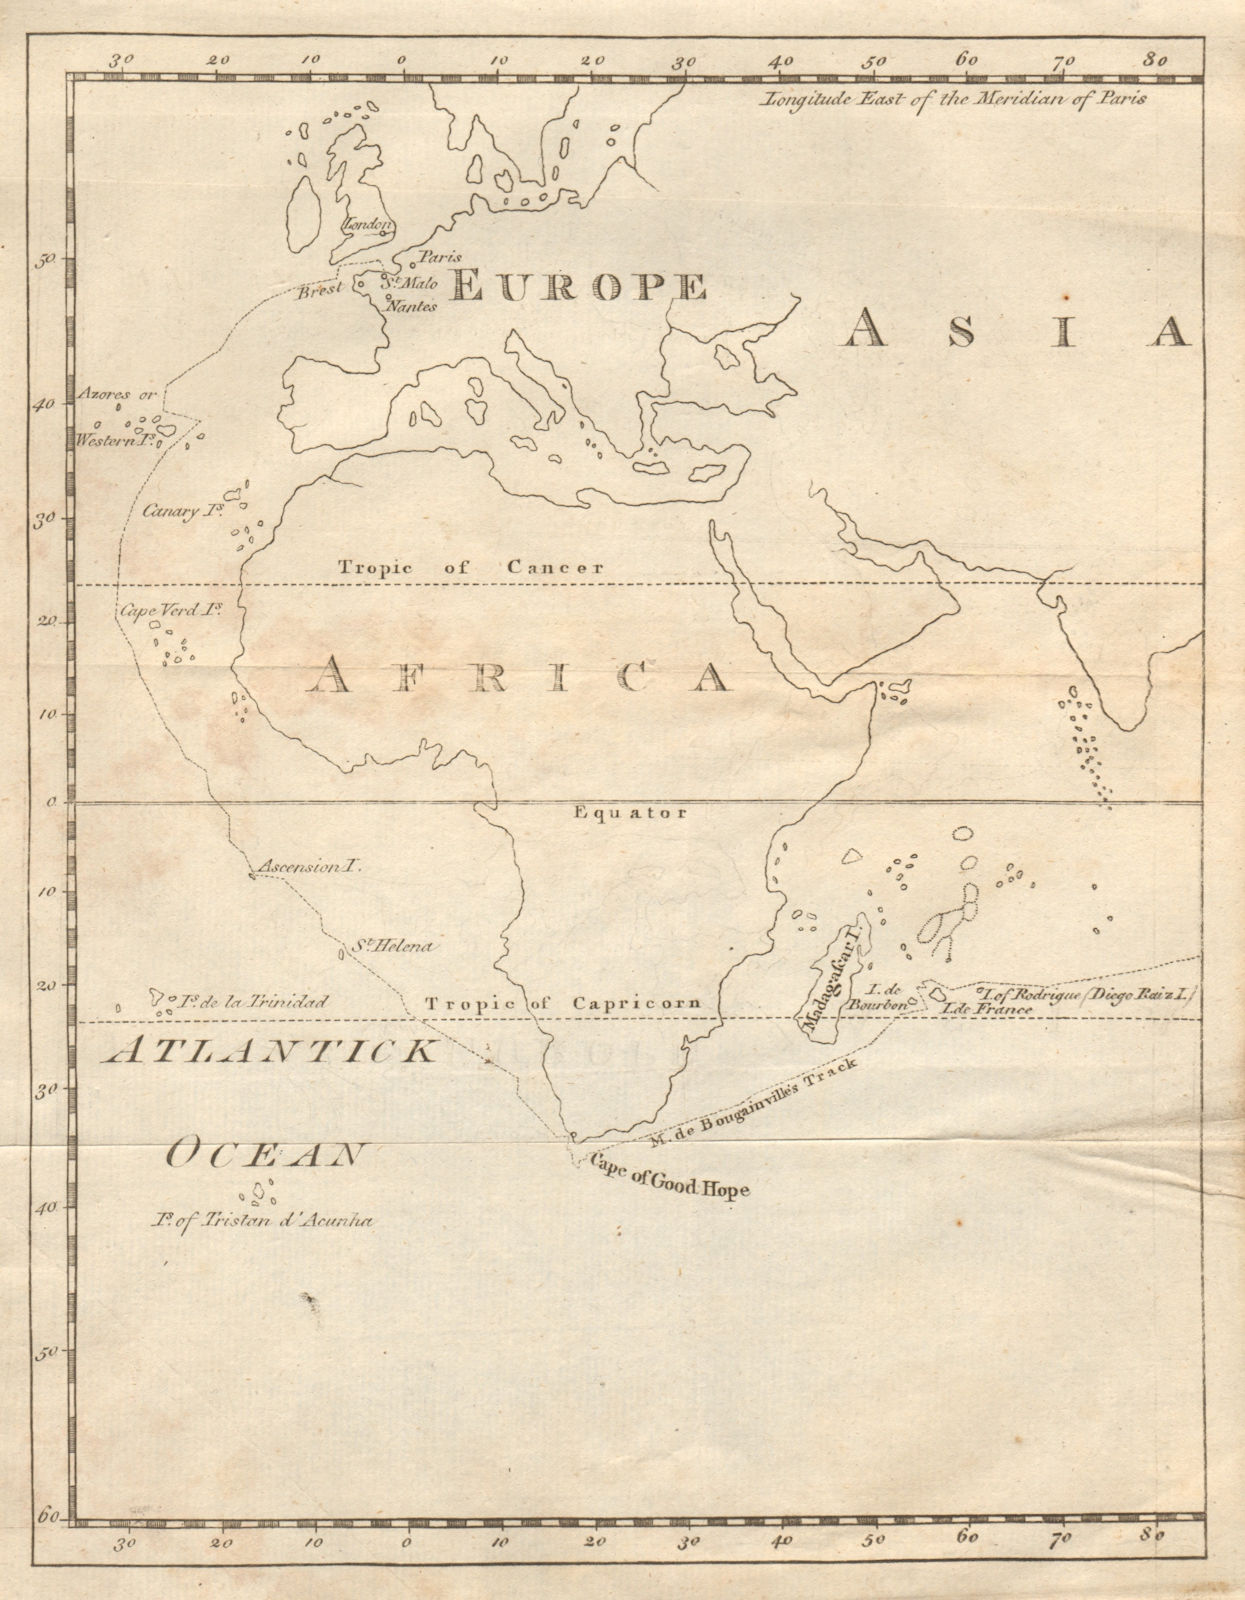 Bougainville's 1766 circumnavigation. France-Africa-Réunion. GENTS MAG 1774 map